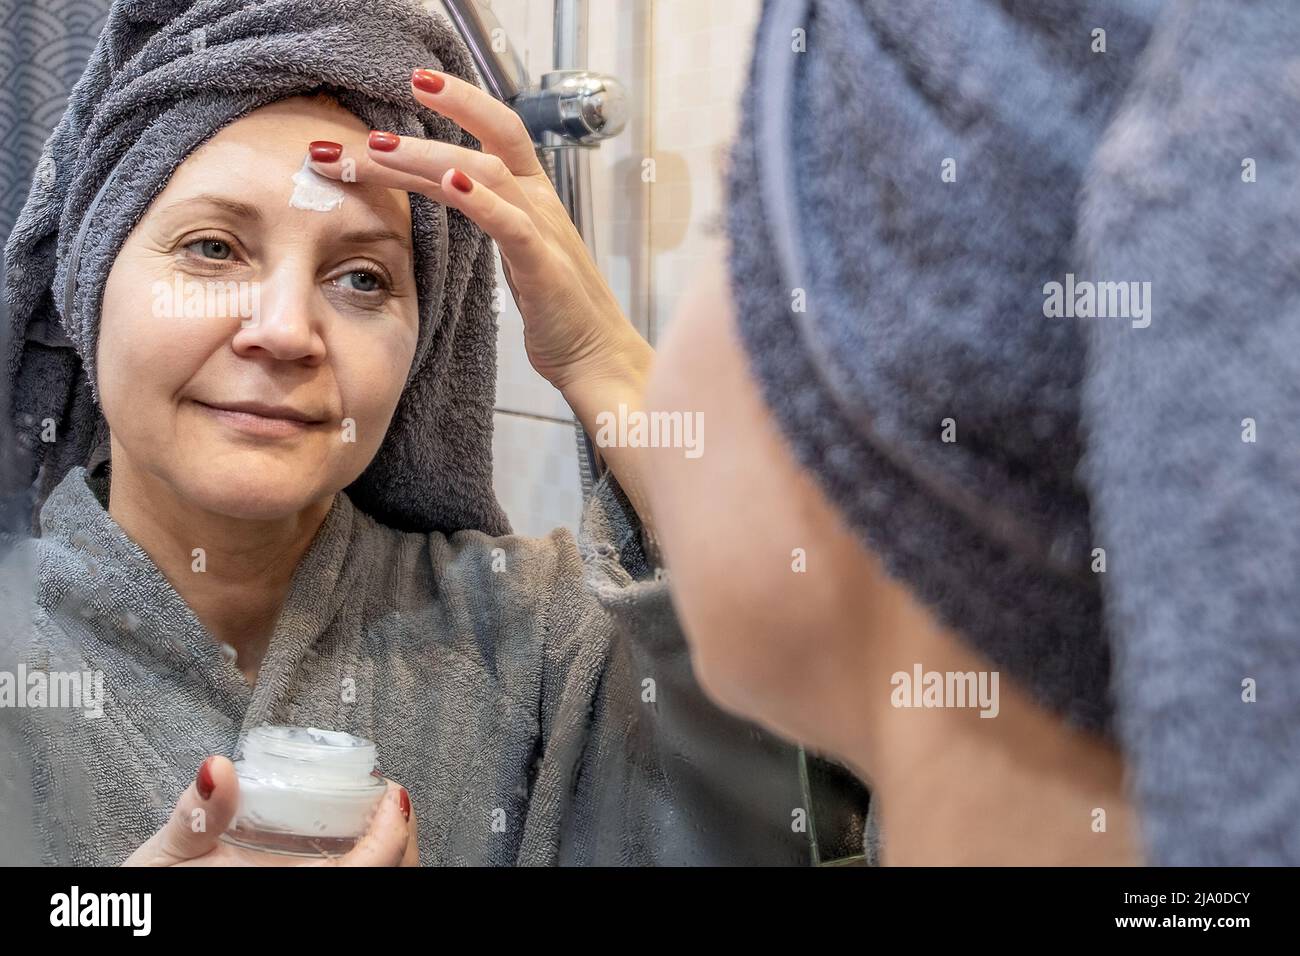 A young smiling woman in a towel applies face cream. The concept of skin rejuvenation. The concept of skin care Stock Photo